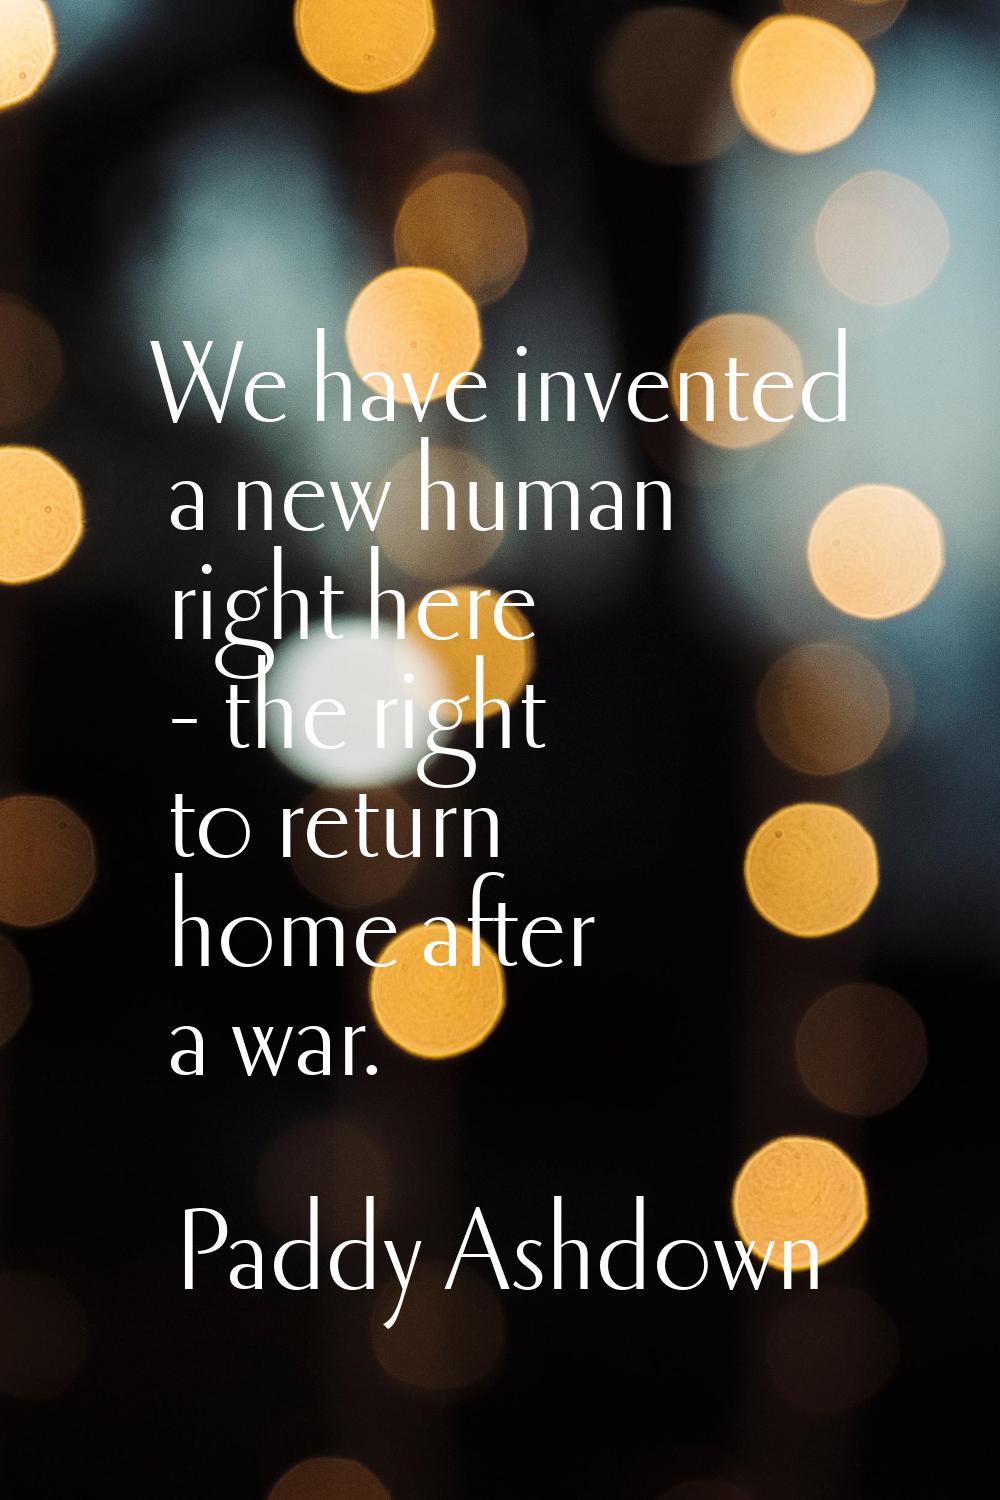 We have invented a new human right here - the right to return home after a war.